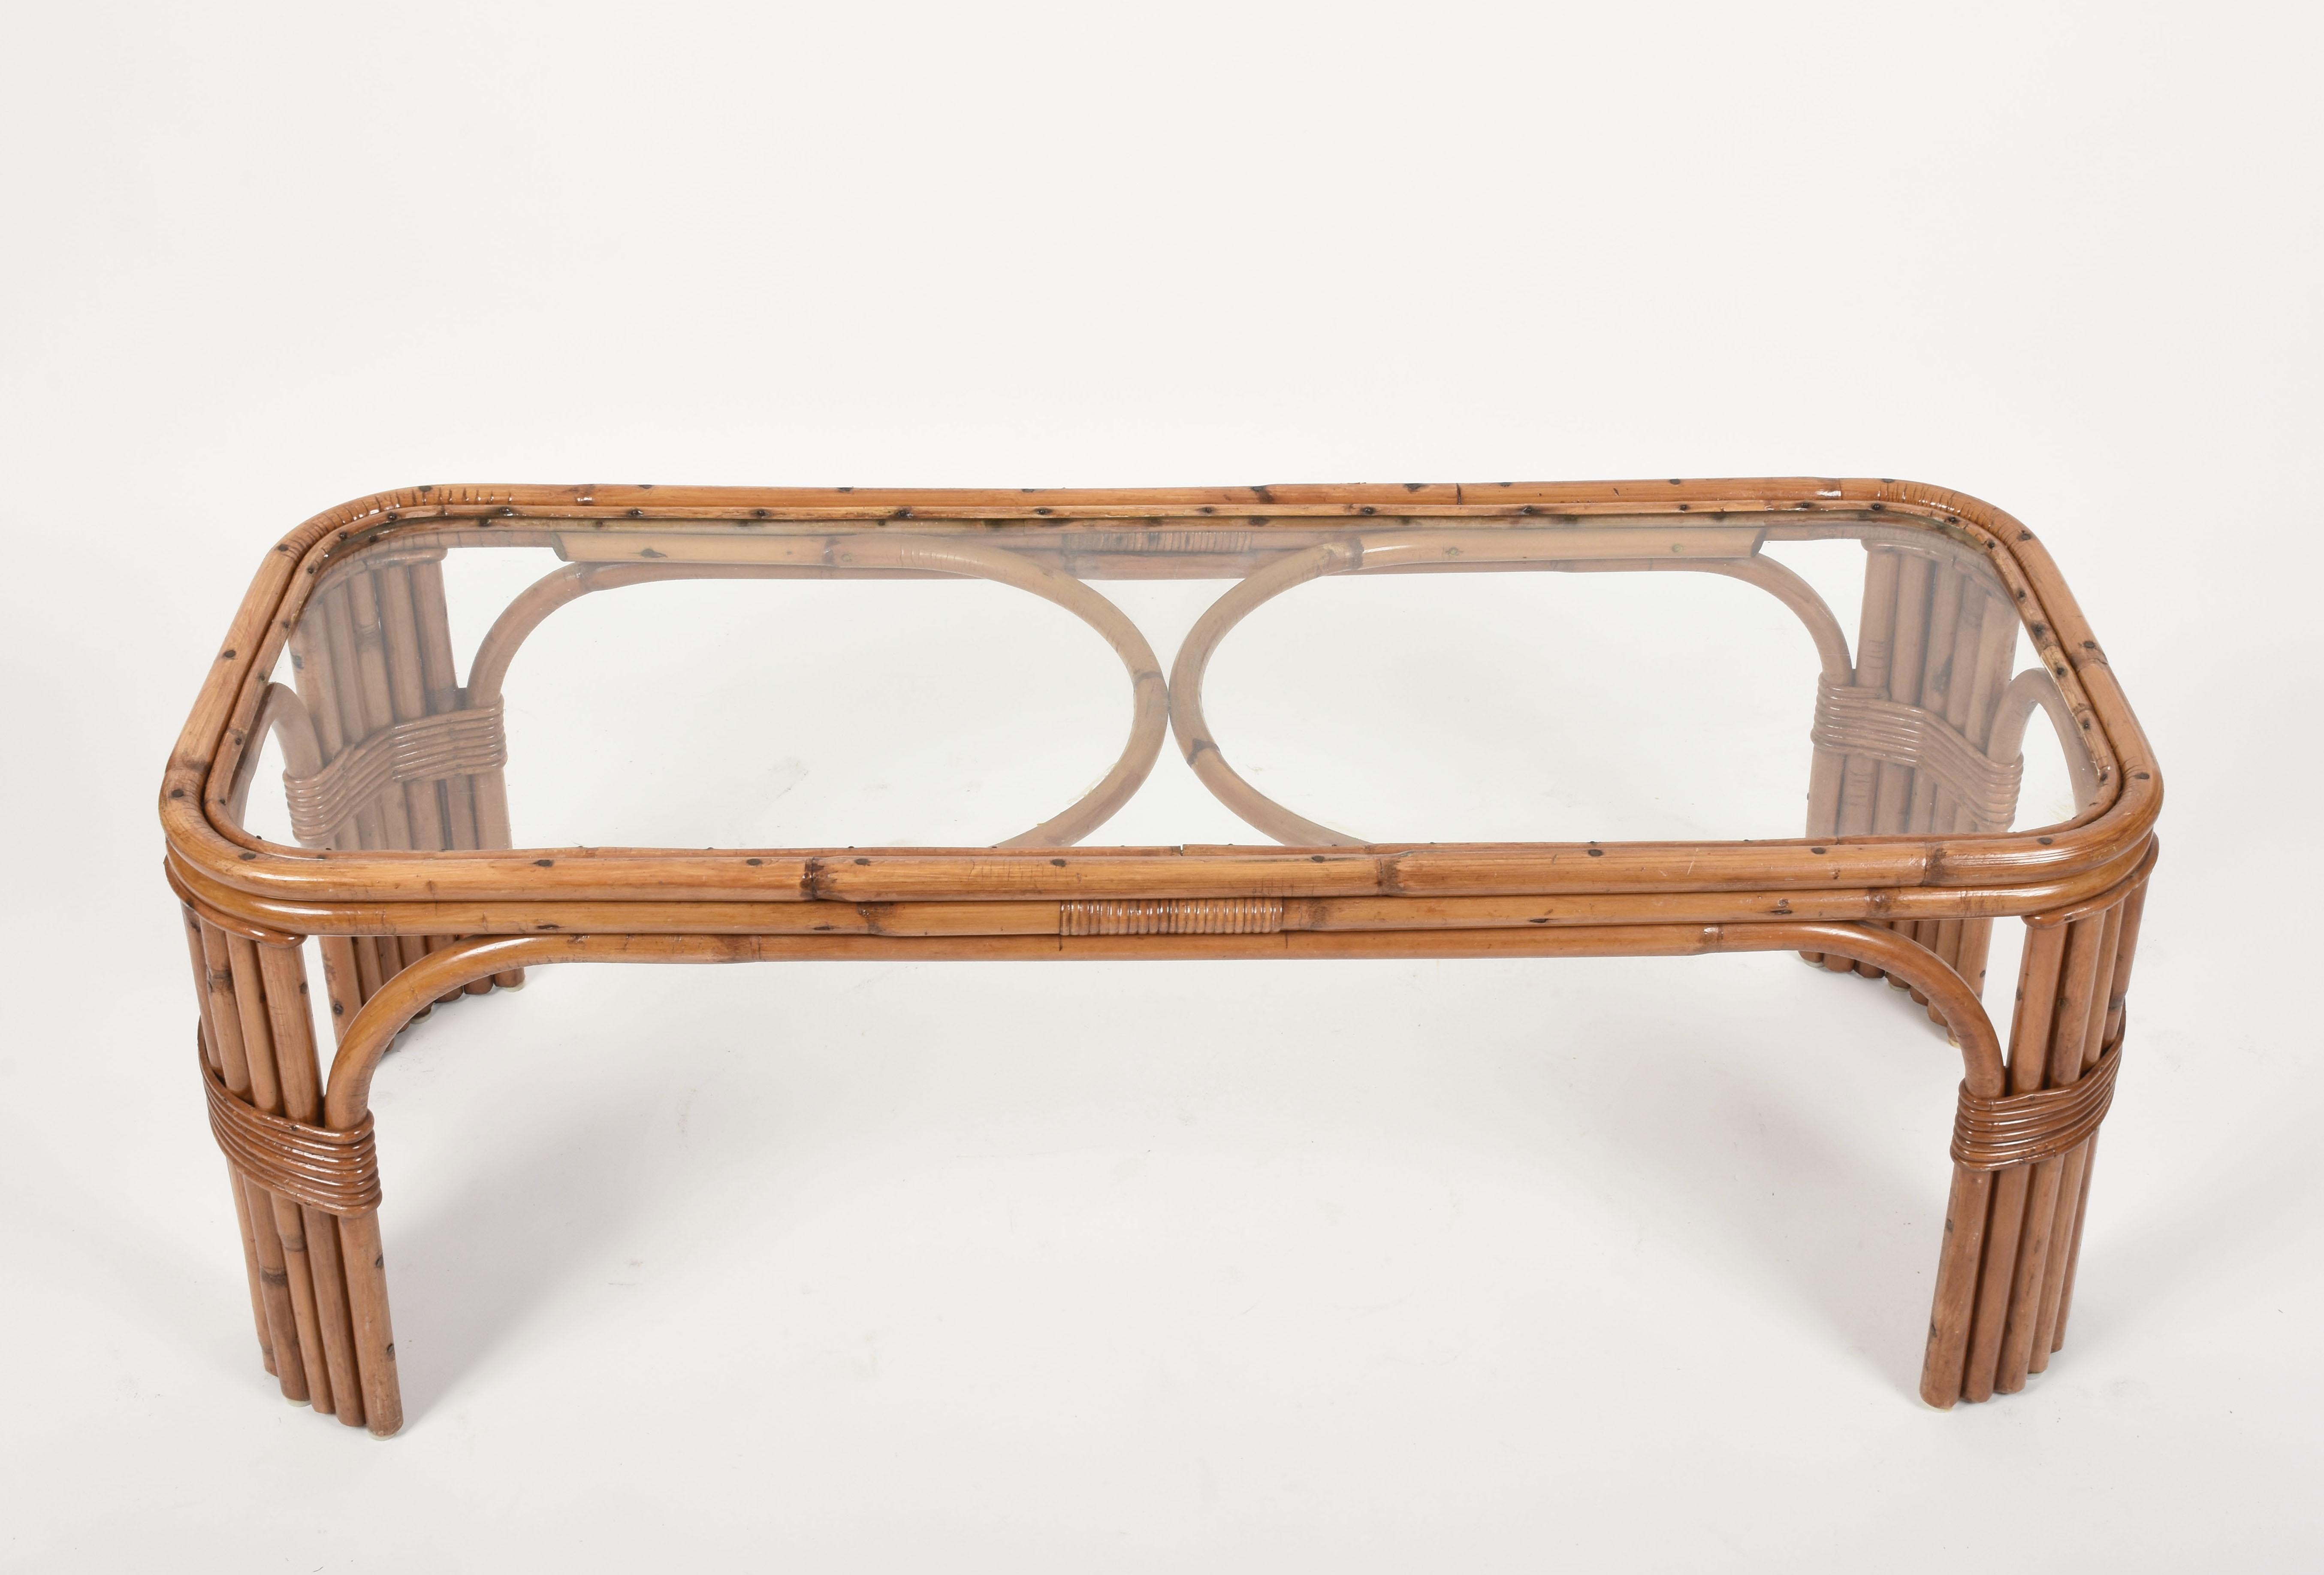 Elegant midcentury rectangular bamboo coffee table with rattan finishes and smoked glass top.

This iconic Italian piece is attributed to the designer Tito Agnoli and the production of Bonacina and it is dated in between the 1960s.

The delicate